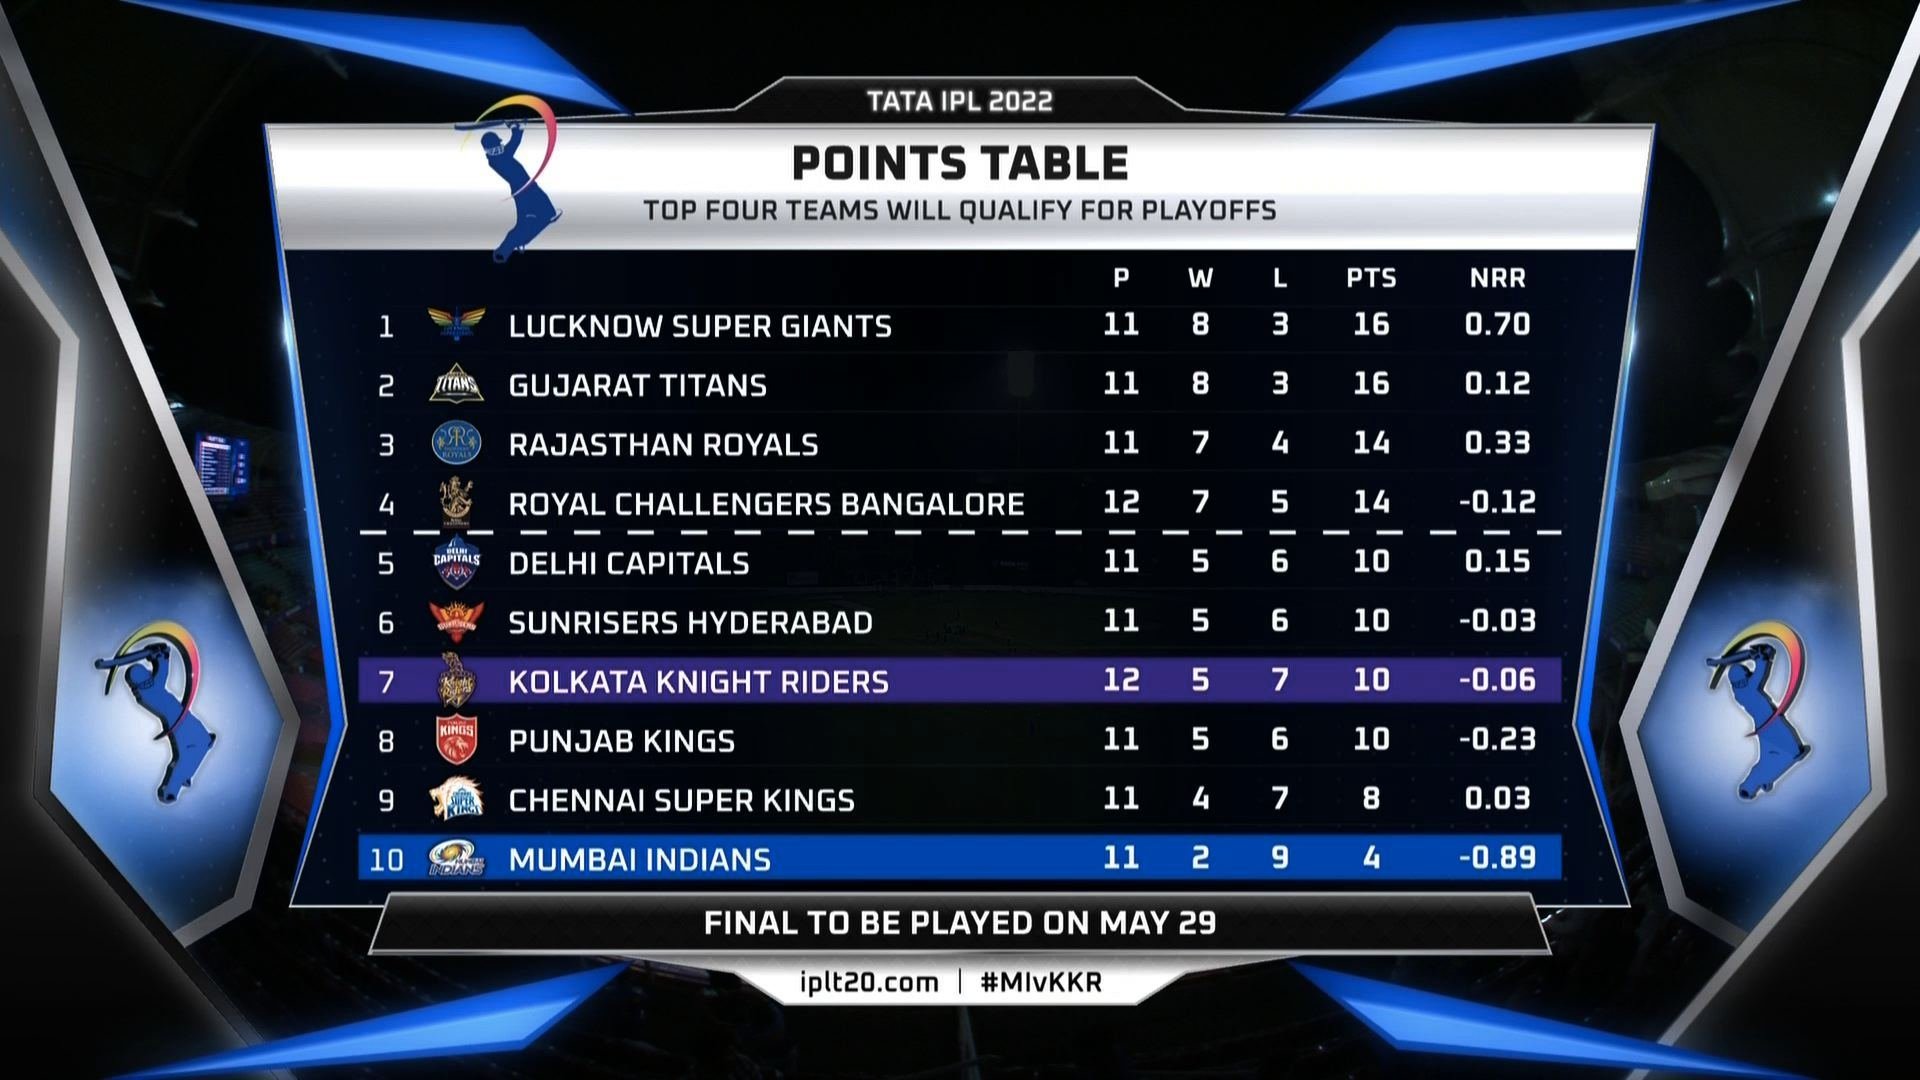 IPL 2022 point table 10 MAY